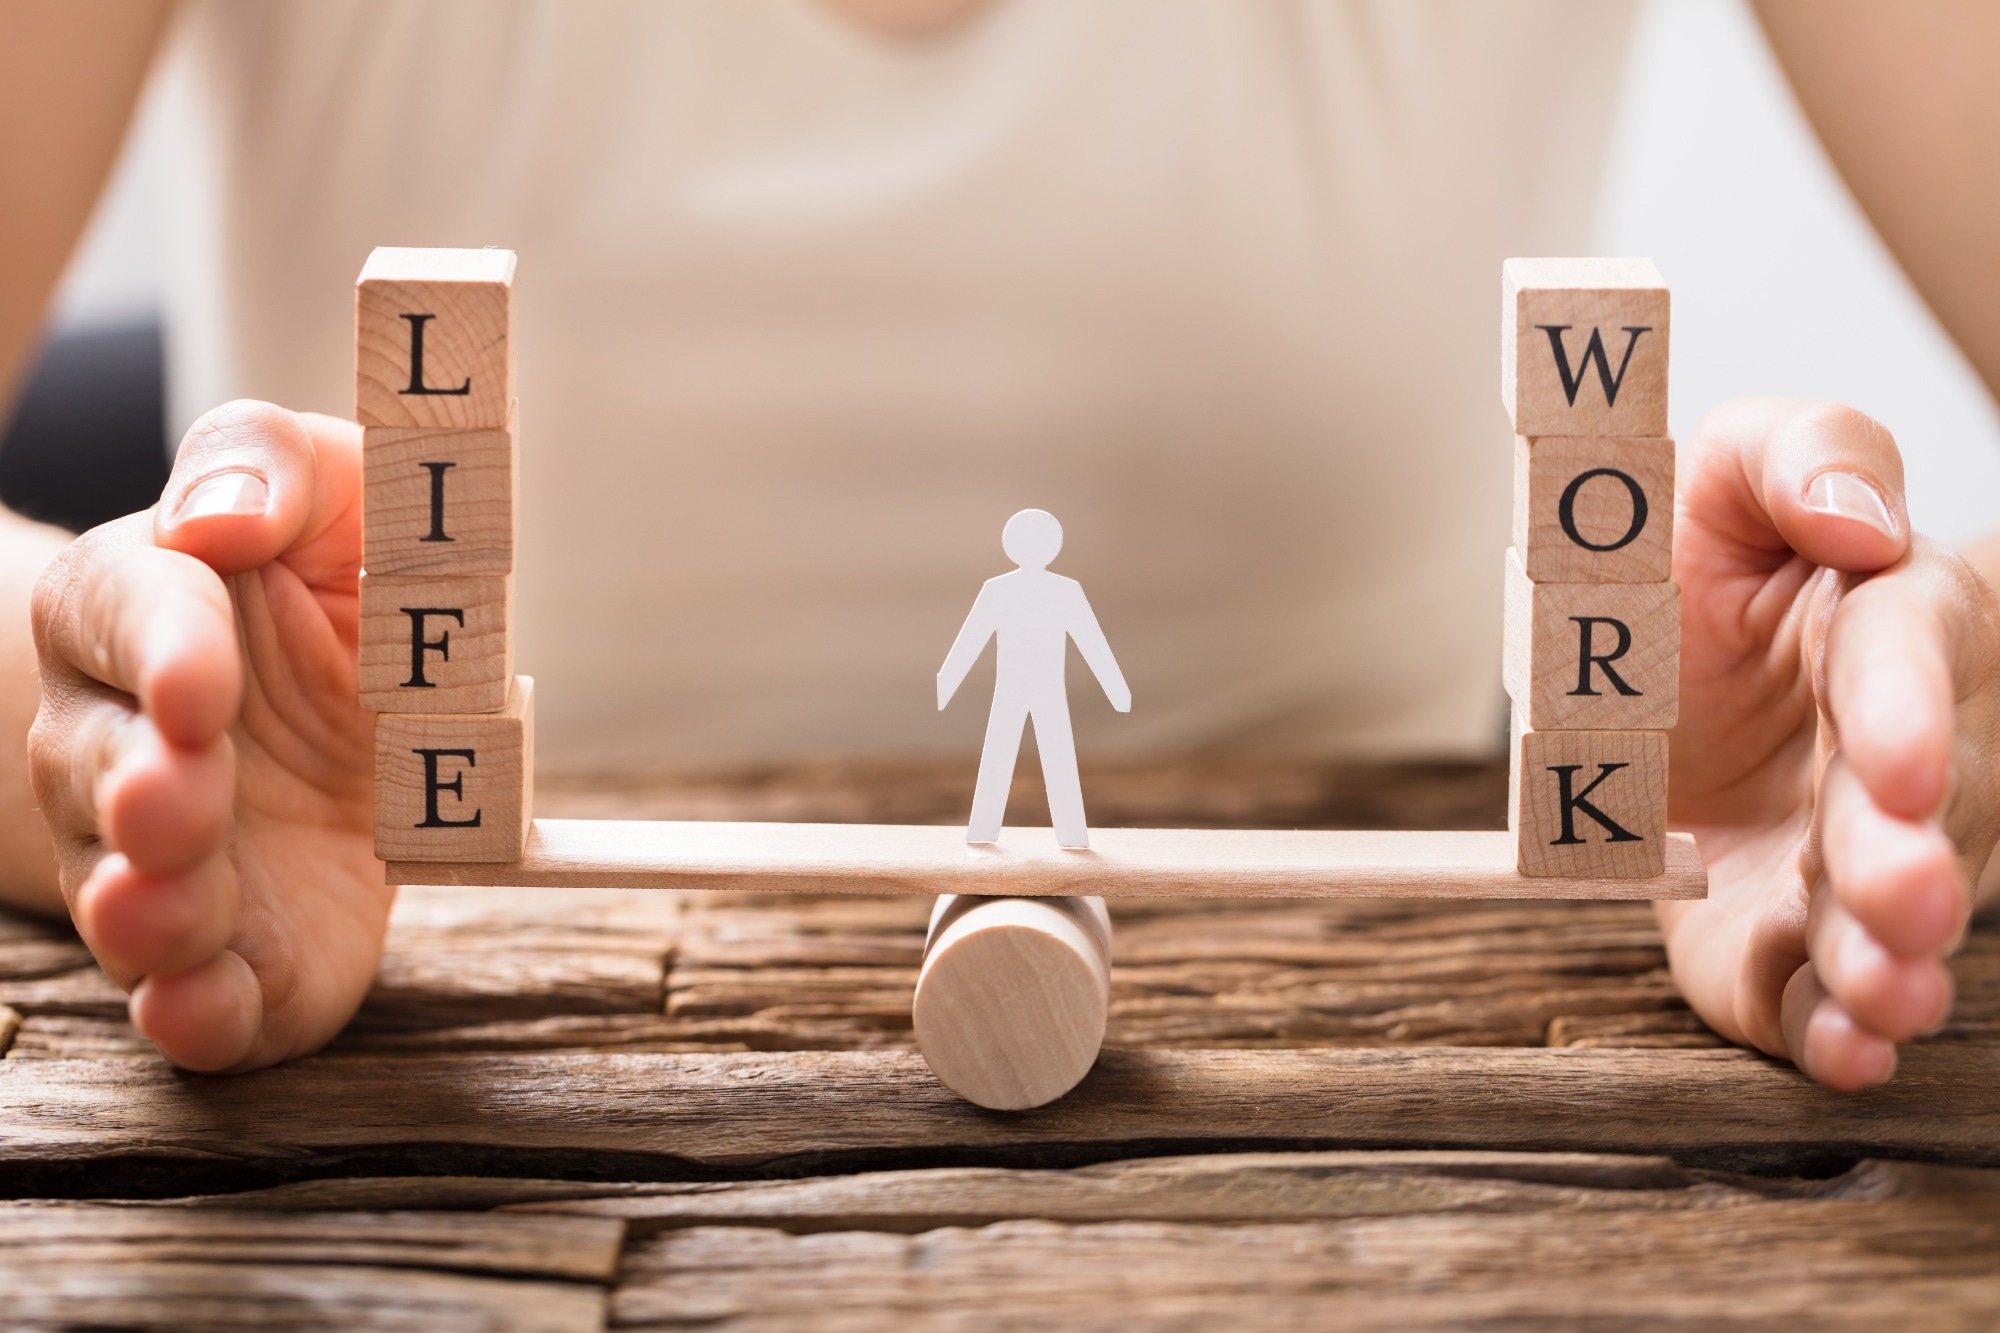 Study: Working hours, social engagement, and depressive symptoms: an extended work-life balance for older adults. Image Credit: Andrey_Popov/Shutterstock.com